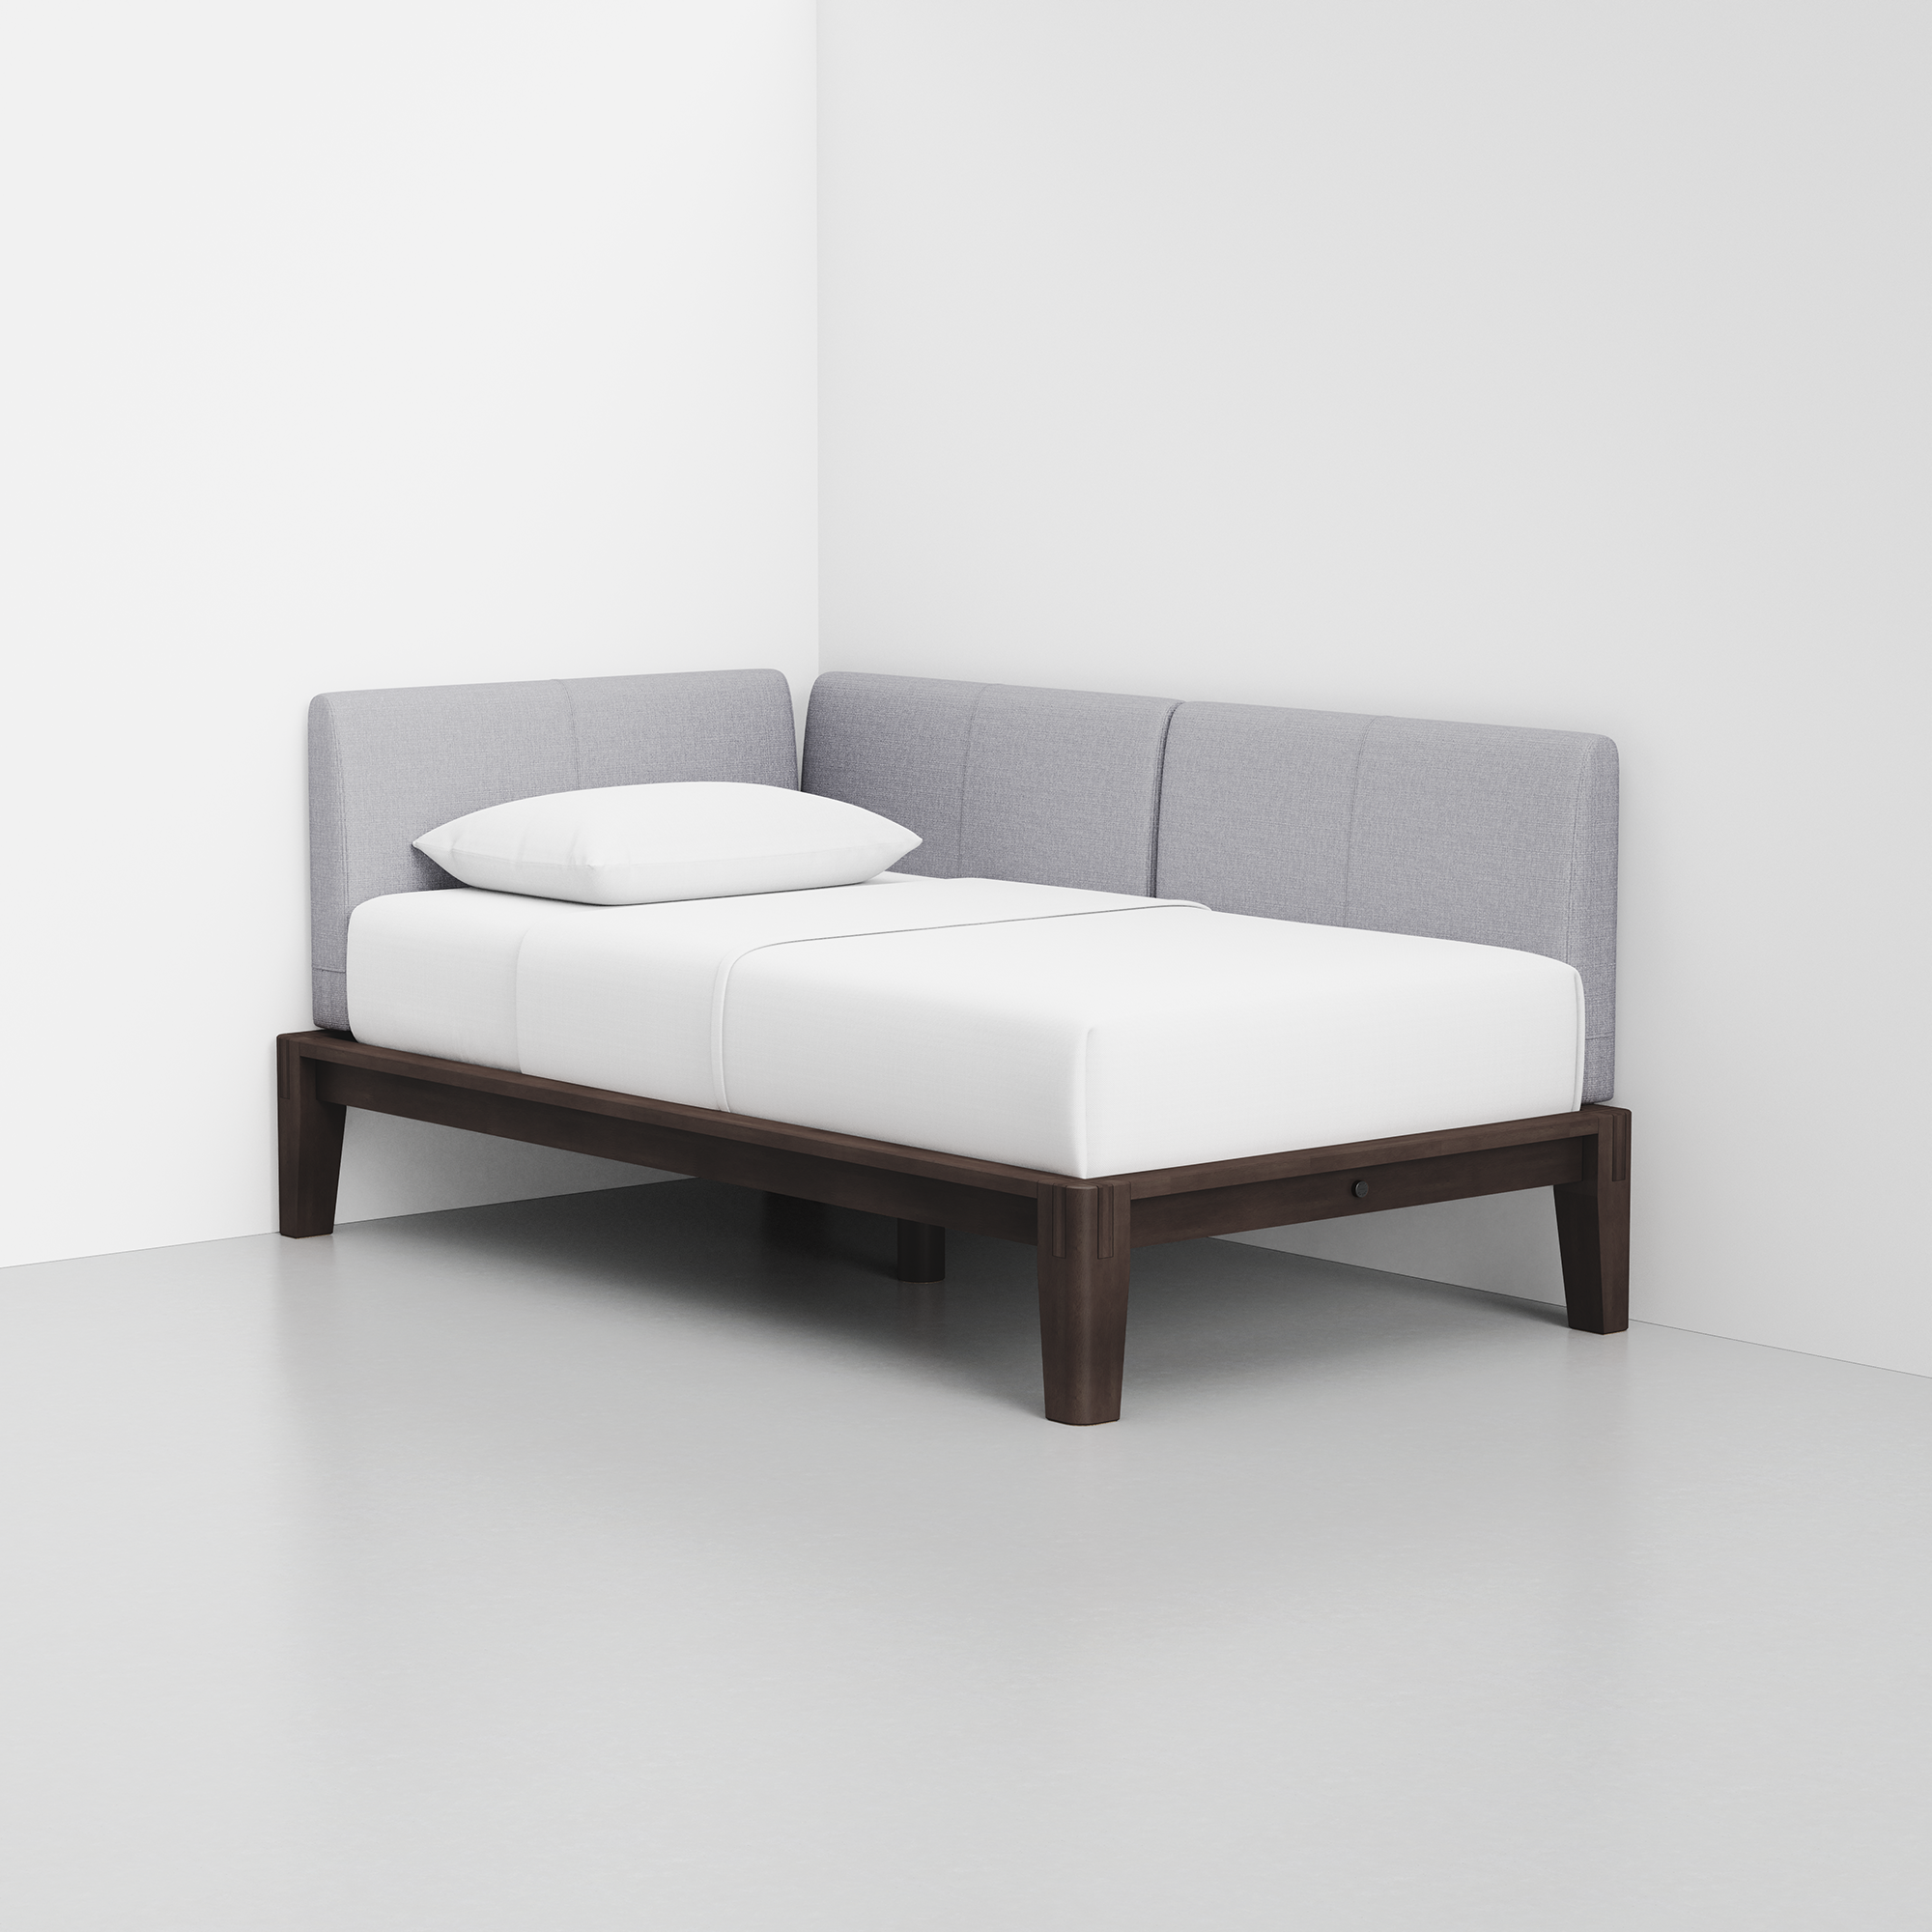 PDP Image: The Daybed (Espresso / Fog Grey) - Rendering - Front